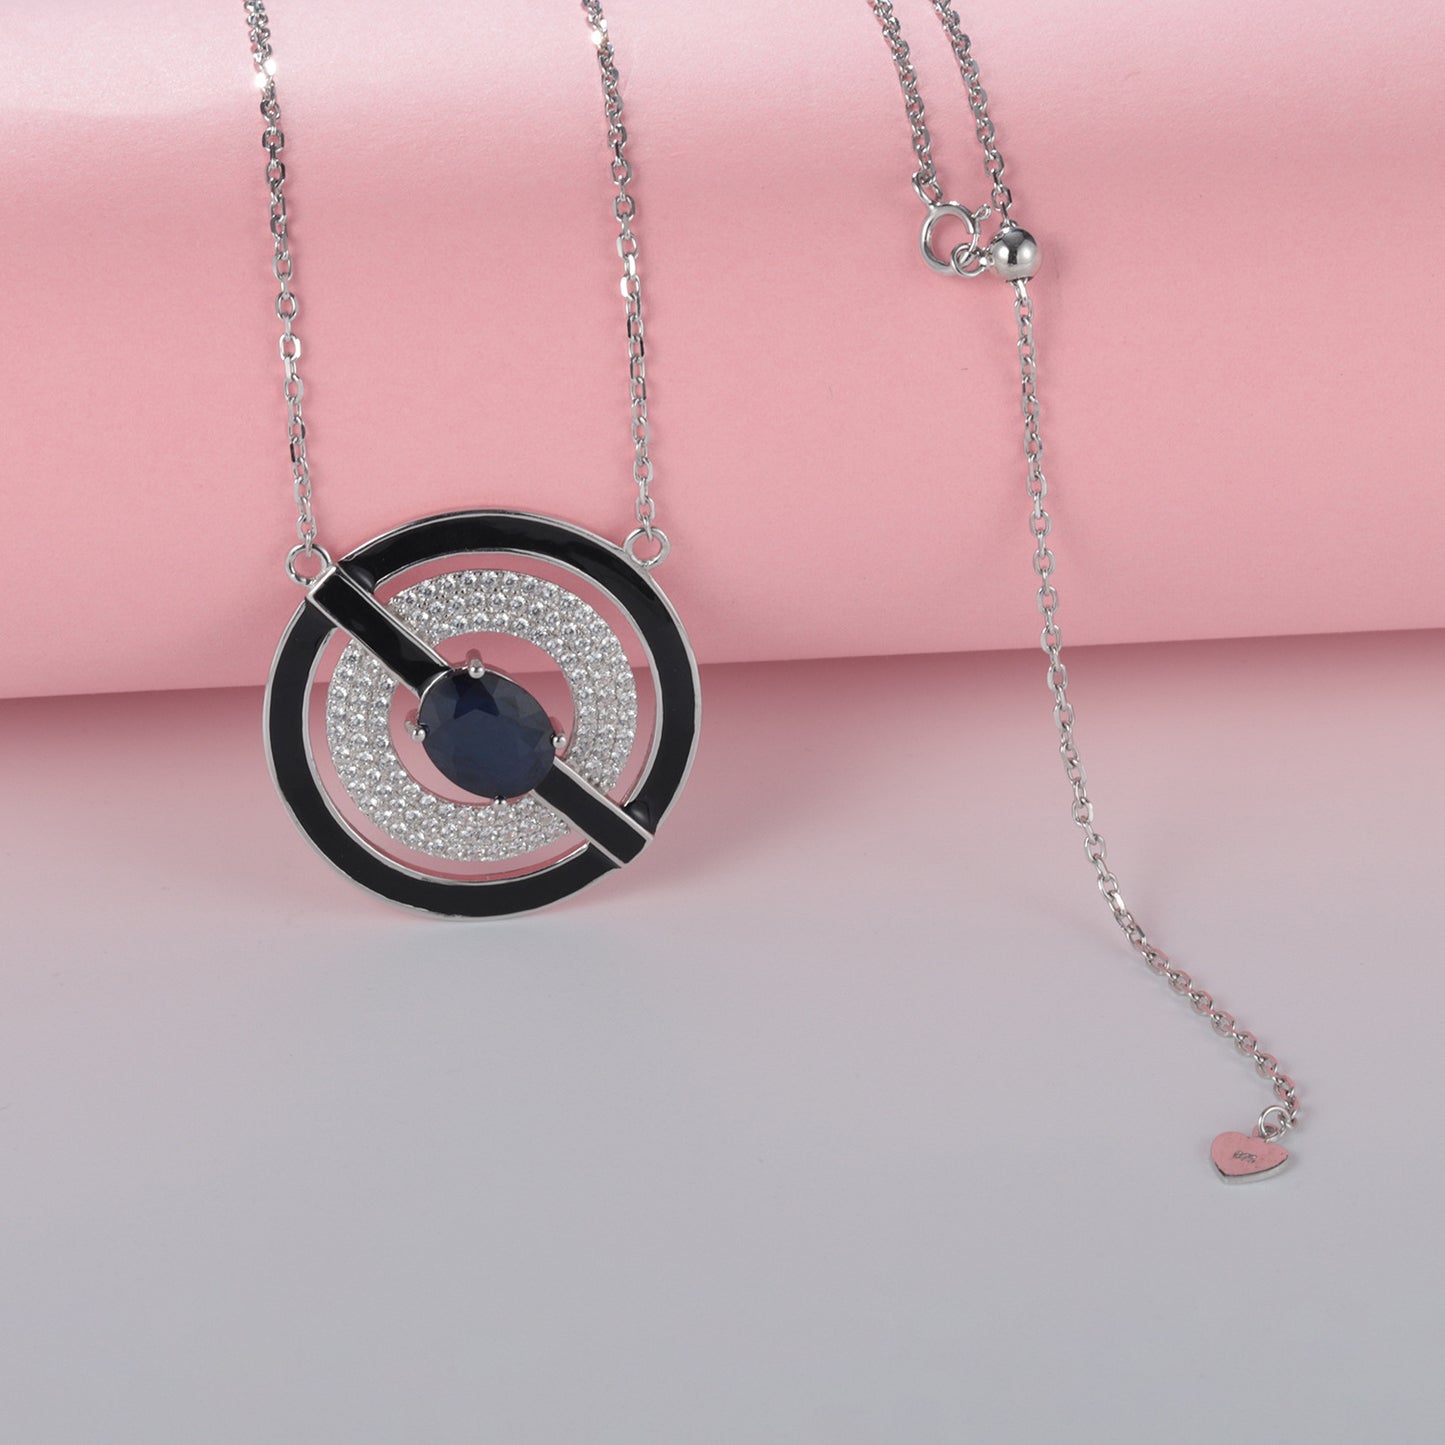 Personality Ring Design Natural Colorful Gemstone Enamel Circle Pendant Silver Necklace for Women